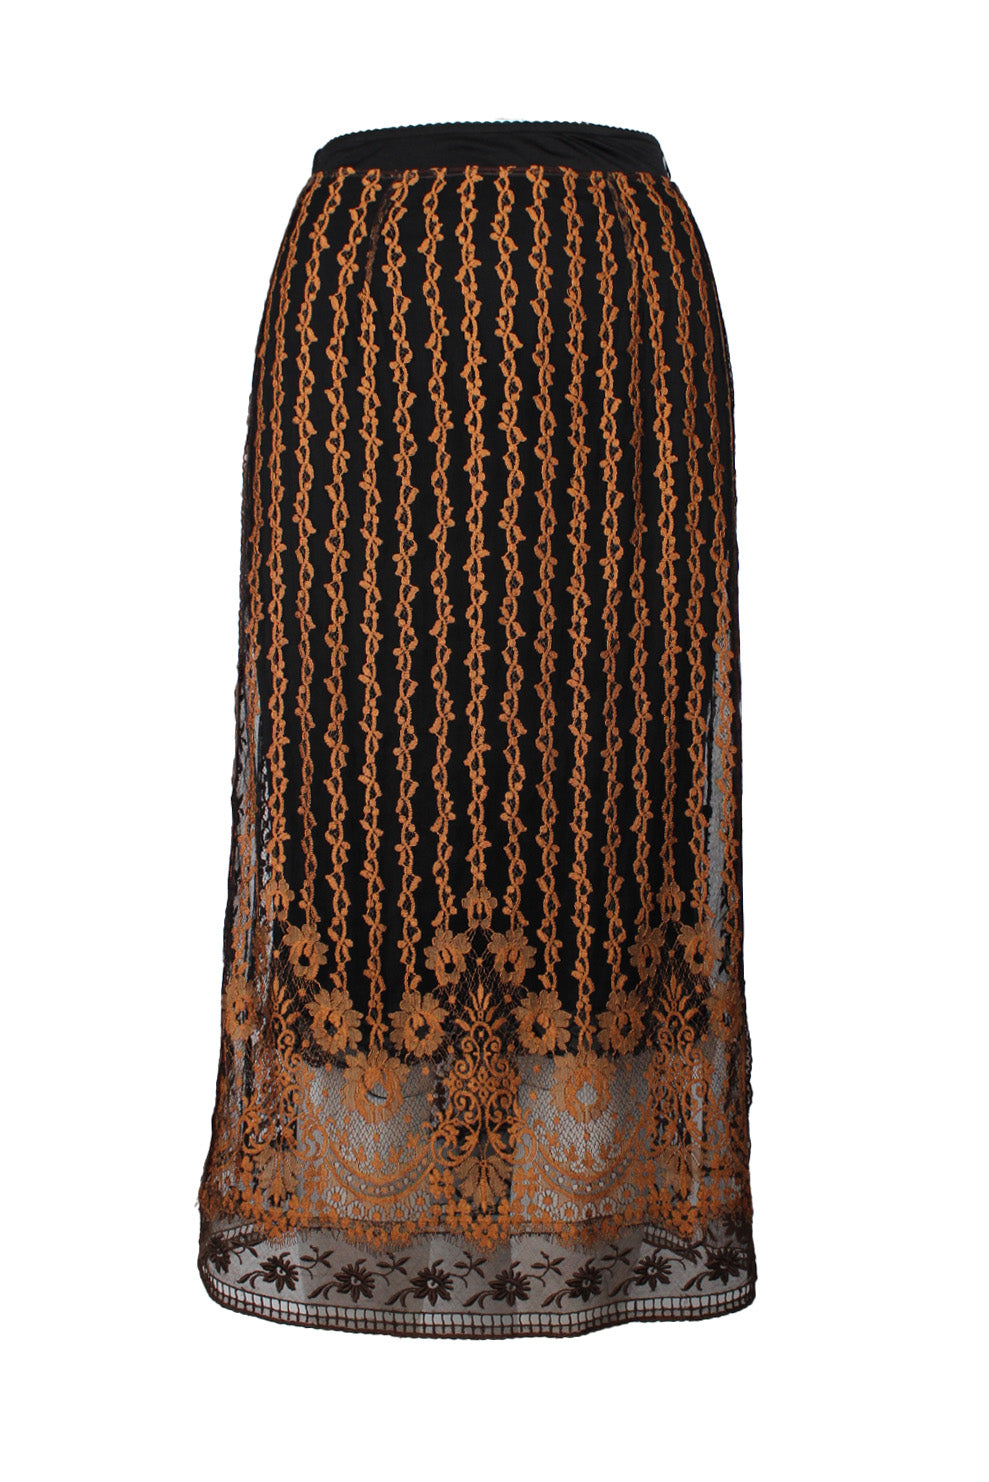 description: collette dinnigan brown orange sheer lace skirt. features black lining skirt, orange floral lace, button closure at left side, and midi length. 